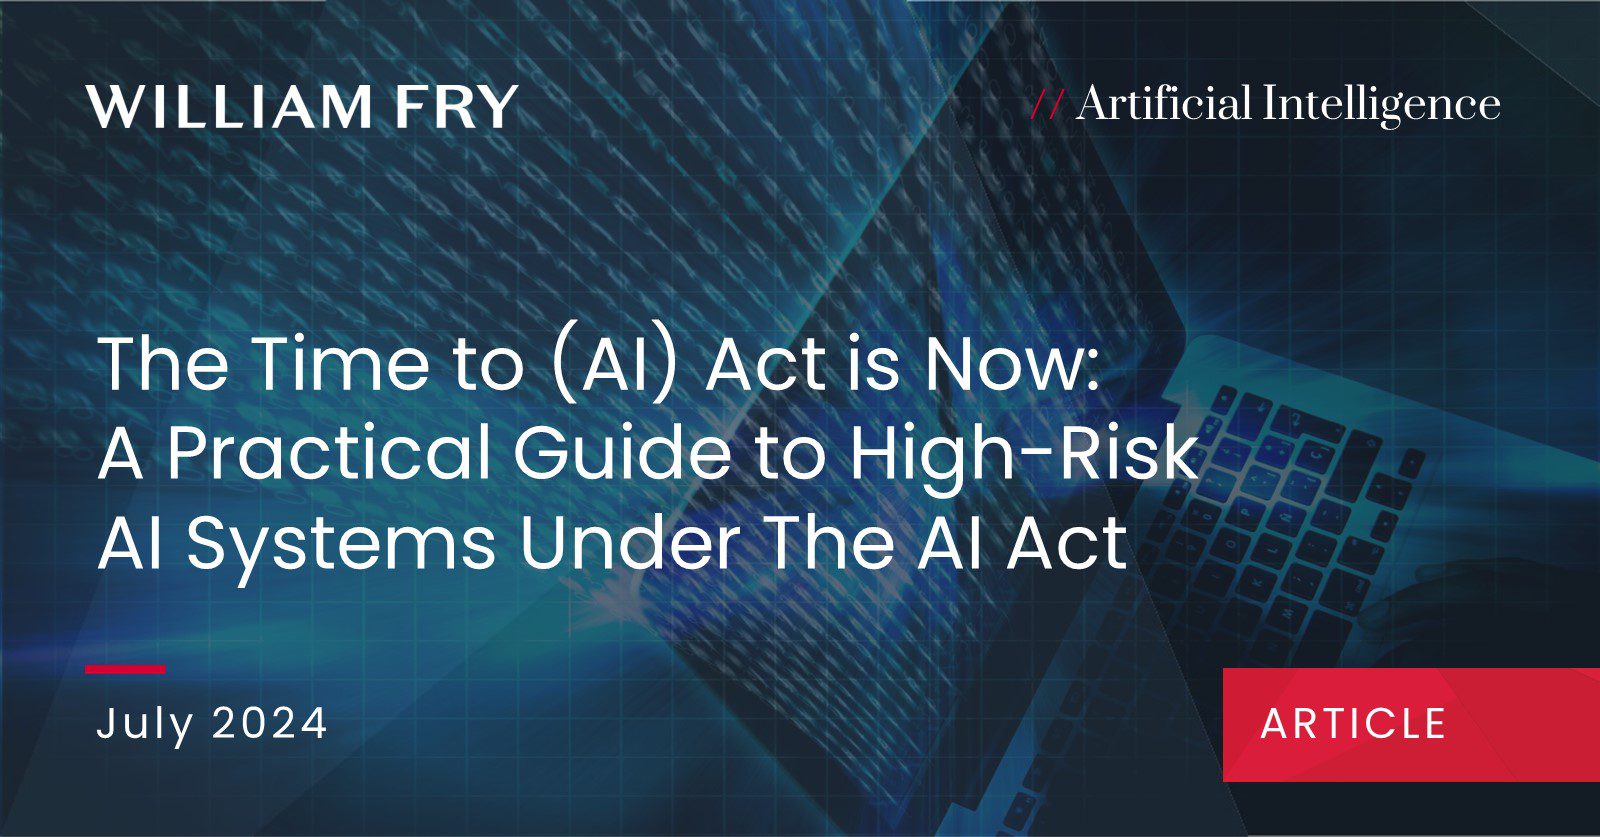 The Time to (AI) Act is Now A Practical Guide to High-Risk AI Systems Under The AI Act